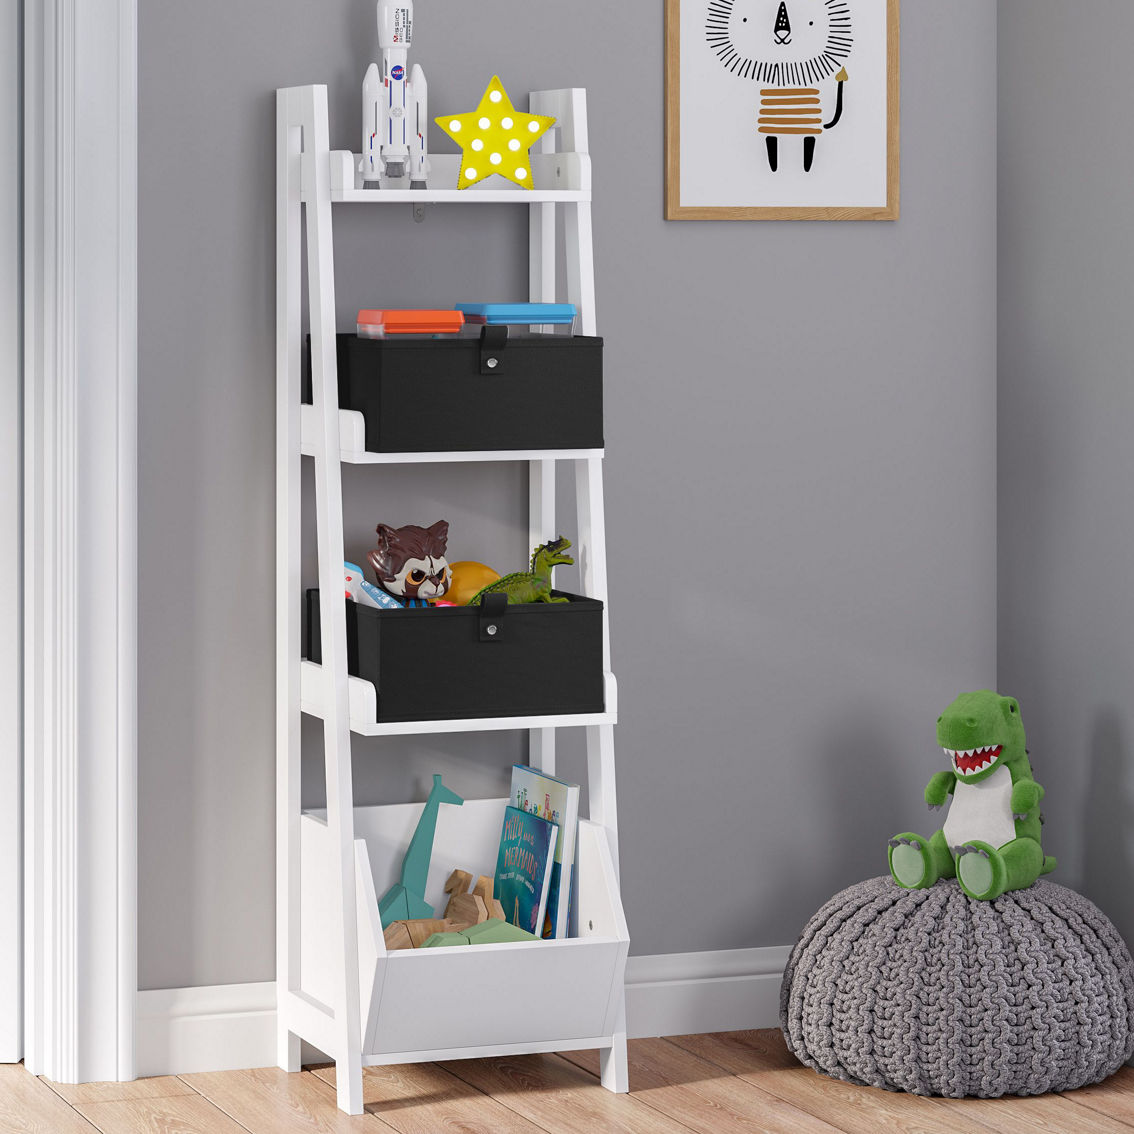 RiverRidge Kids 4-Tier 13in Ladder Shelf with Toy Organizer and 2pc Bins - Image 2 of 5